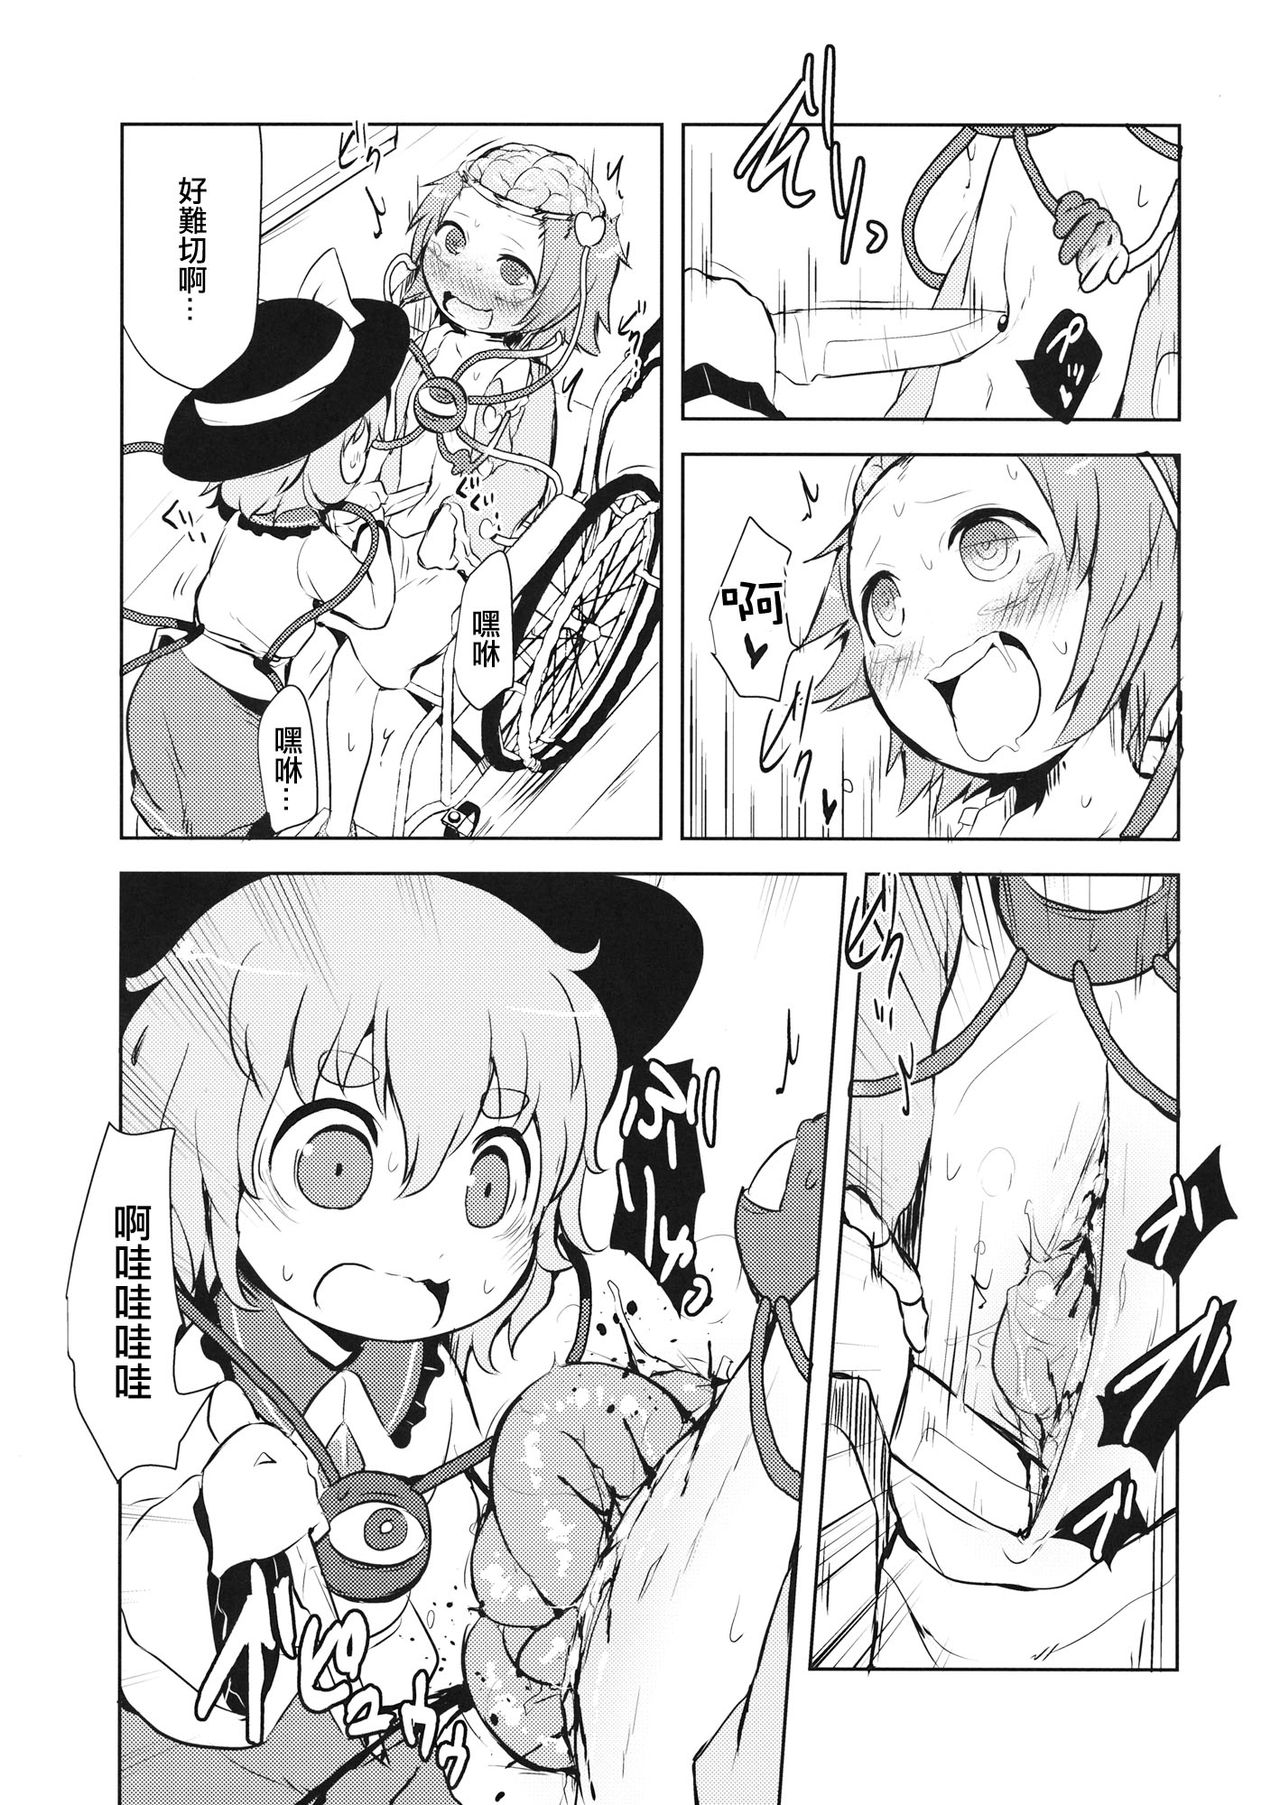 (Reitaisai 13) [02 (Harasaki)] FREAKS OUT! (Touhou Project) [Chinese] [沒有漢化] page 13 full